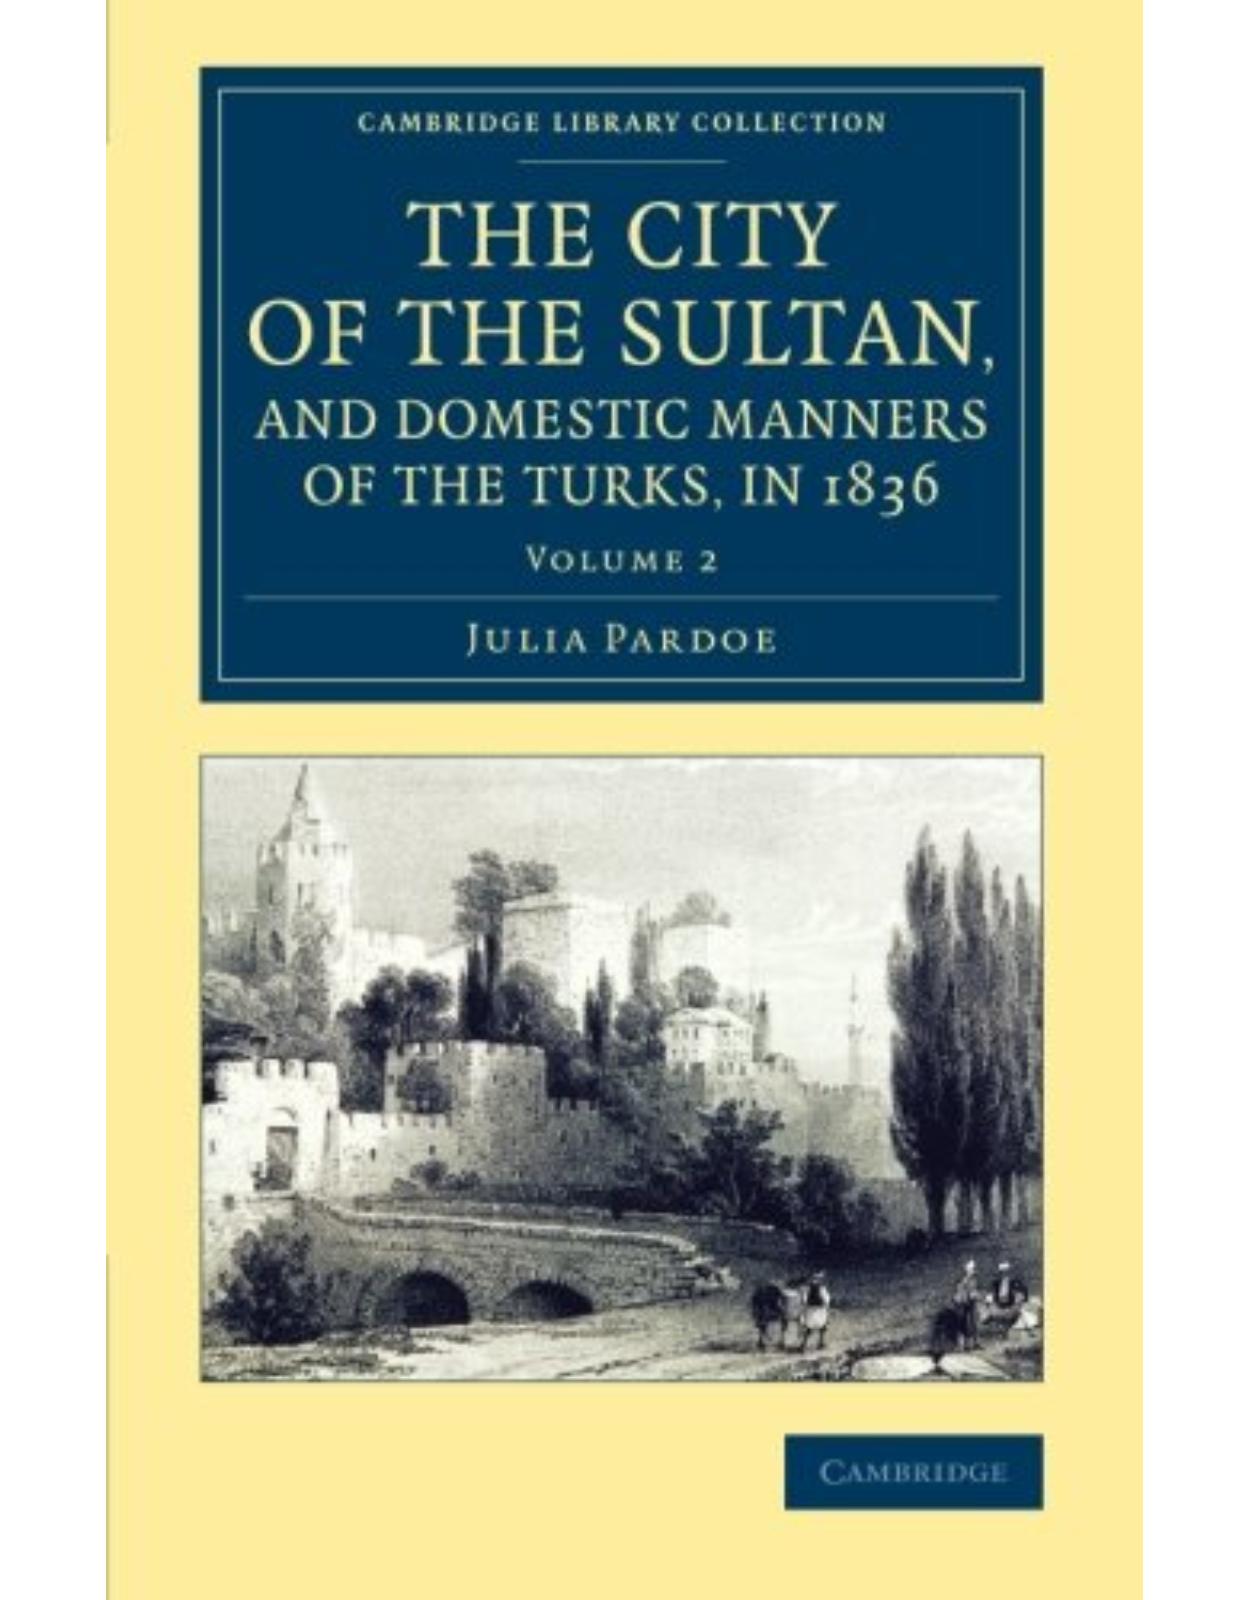 The City of the Sultan, and Domestic Manners of the Turks, in 1836: Volume 2 (Cambridge Library Collection - Travel, Middle East and Asia Minor)